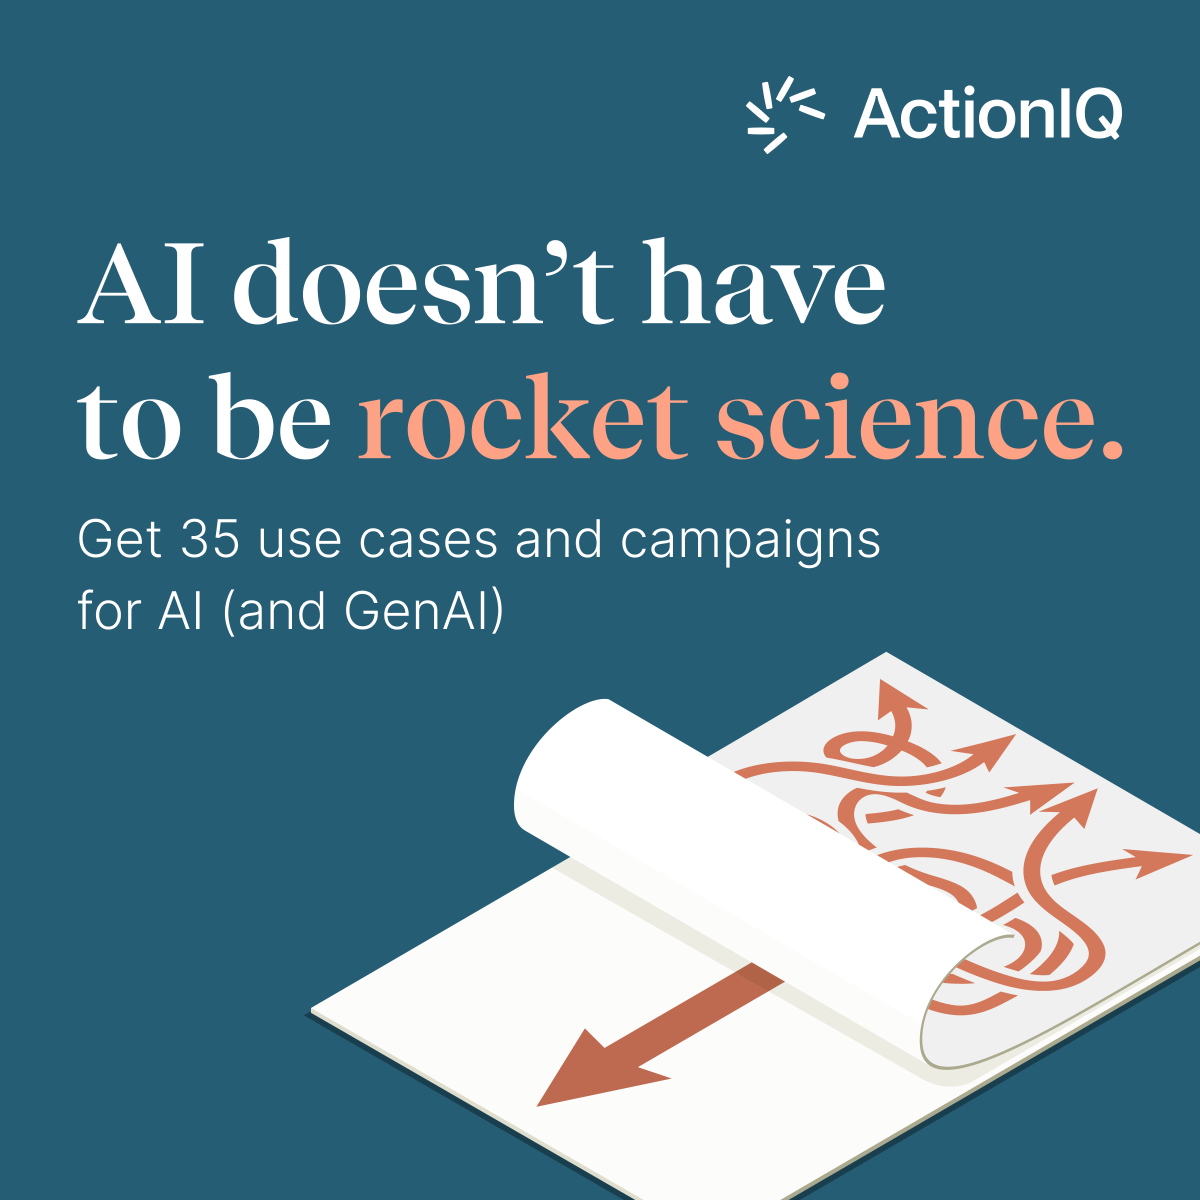 Struggling to make sense of AI, GenAI, and everything in between? We can help with that. Get the knowledge, use cases and campaigns to grow revenue and work better with GenAI in The Marketer's Guide to AI for Business. This way to AI enlightenment 👉 hubs.ly/Q02qMkd_0